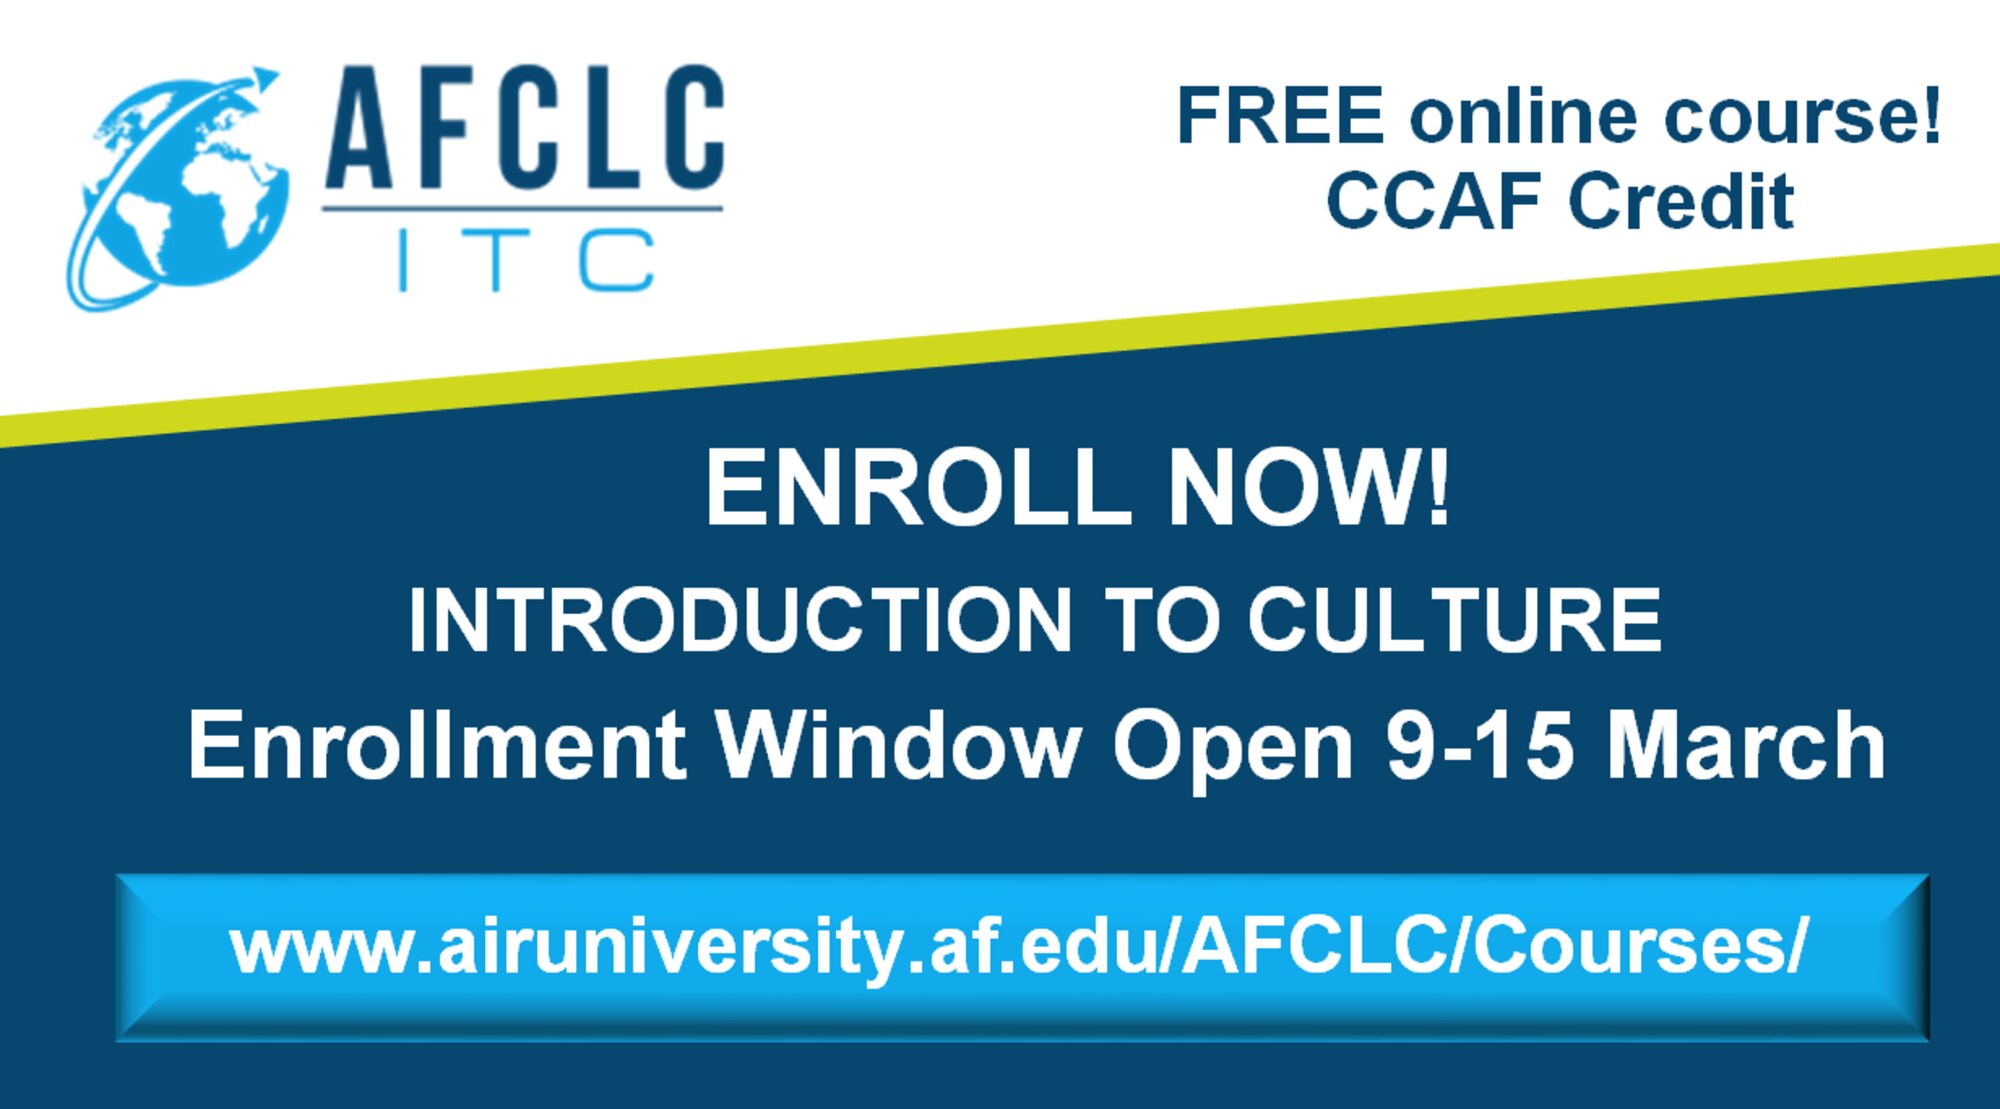 Enrollment Window Open for Introduction to Culture – 9-15 March